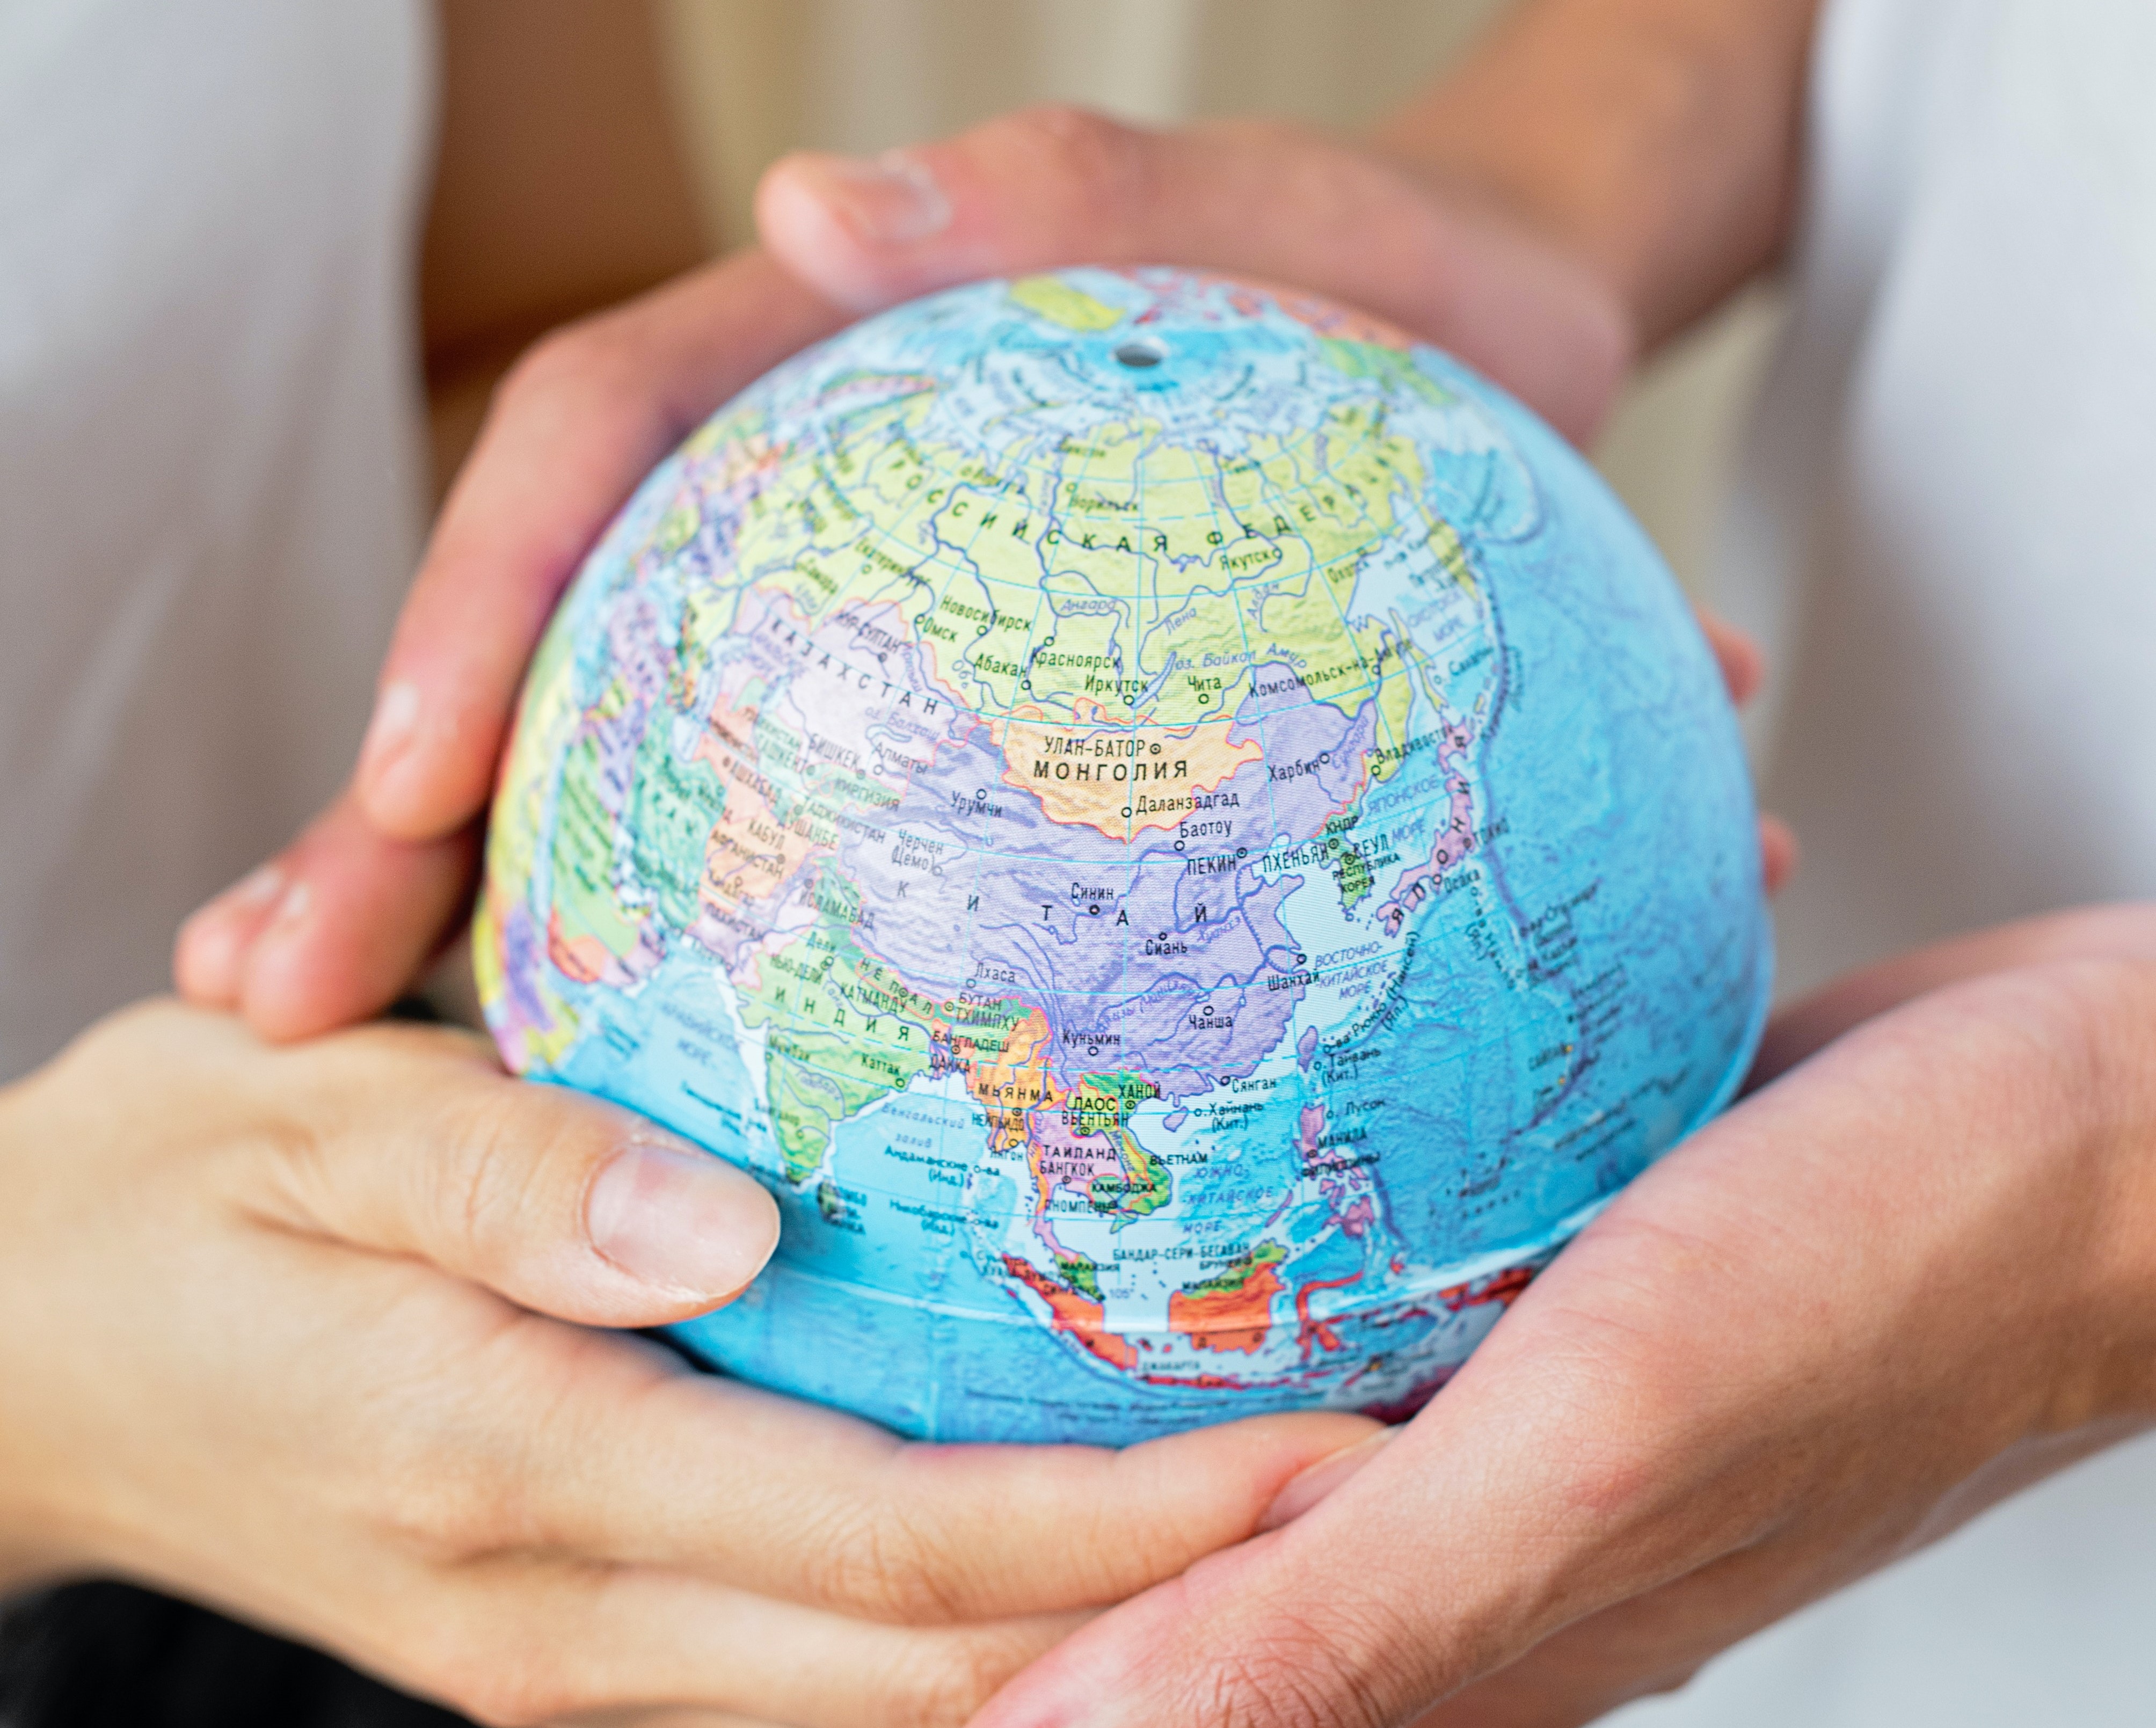 Hands holding small globe